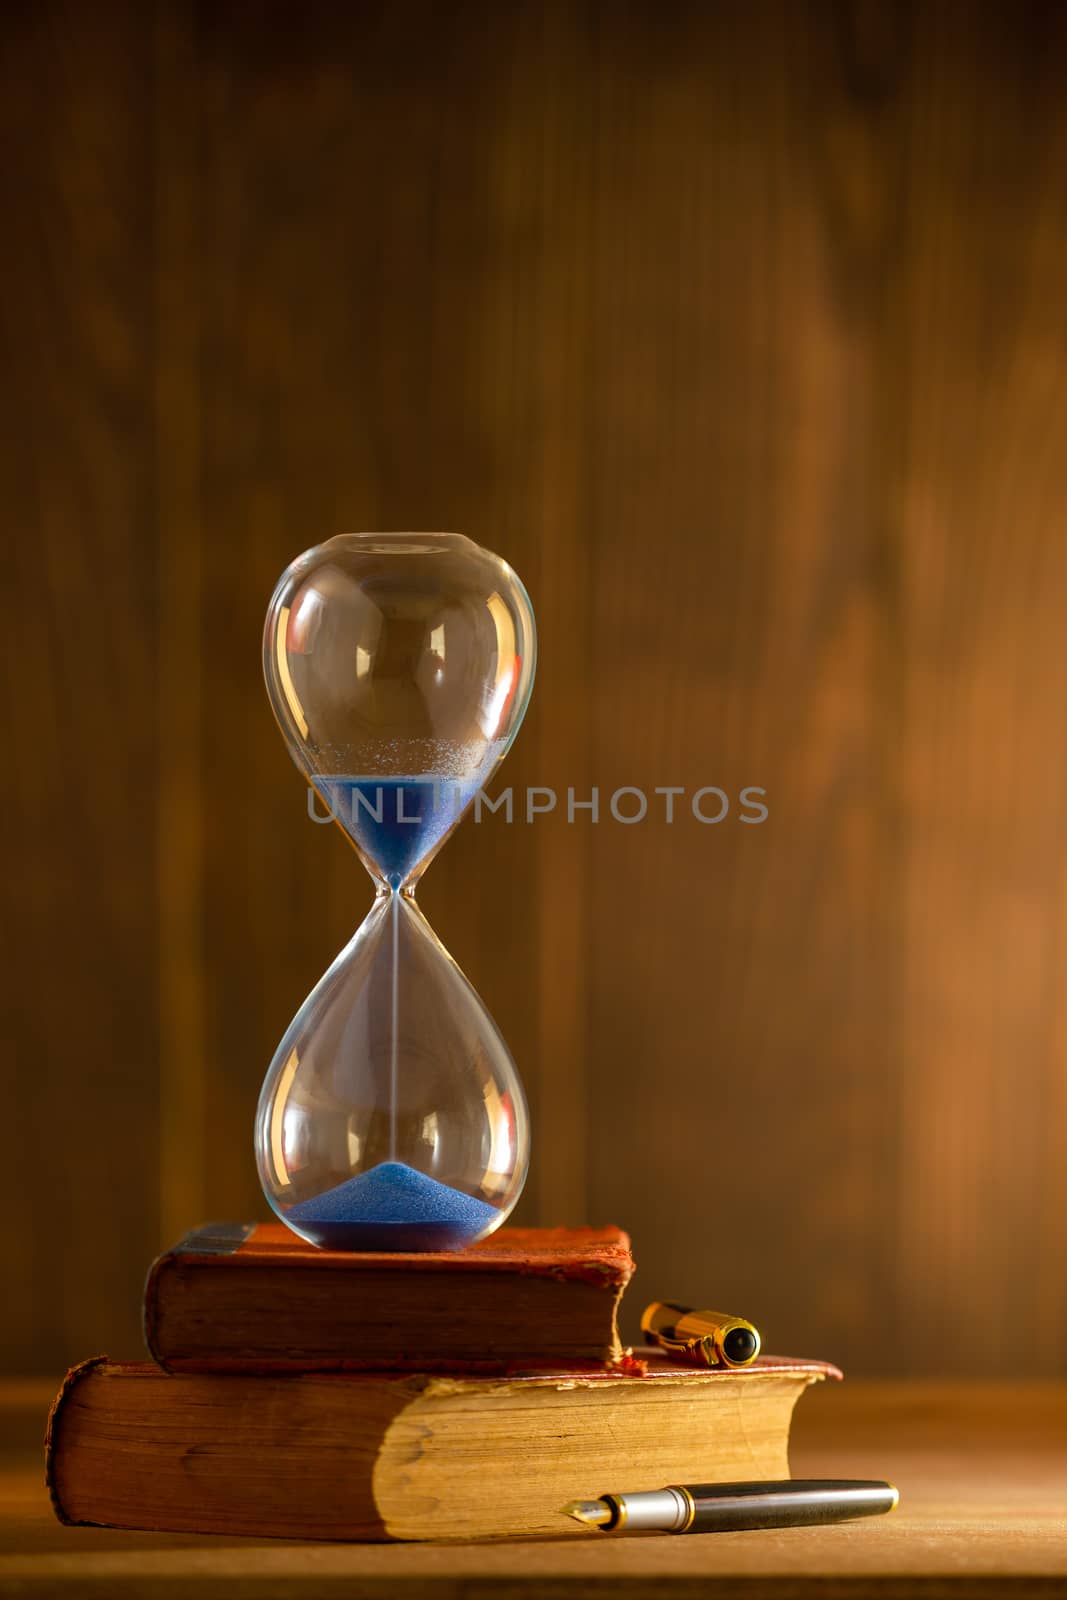 Hourglass on old book in morning. by SaitanSainam